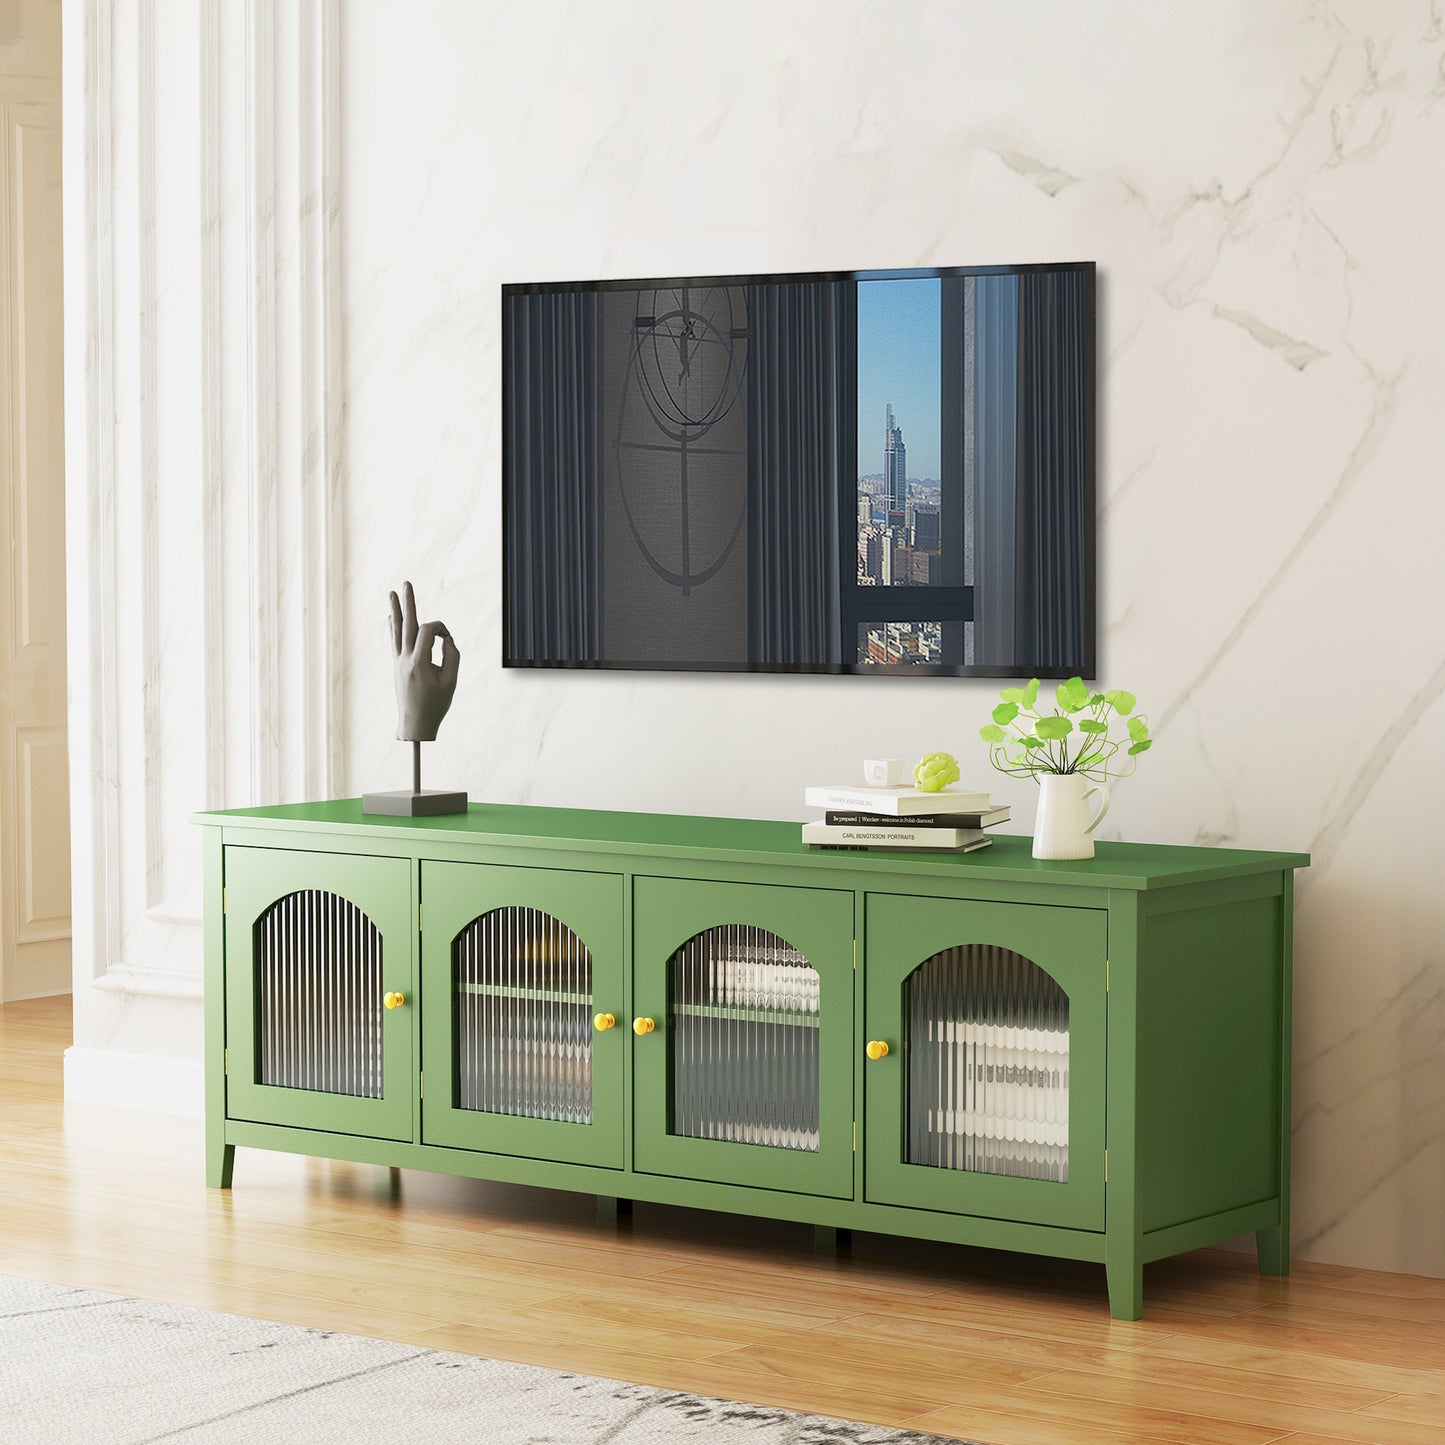 TV Media Console for 70 inch TVs, HSUNNS Modern Green TV Stand with Glass Door and Storage Cabinet, Entertainment Center for Living Room Bedroom, Size: 70.87(L) x 17.72(W) x 24.02(H)